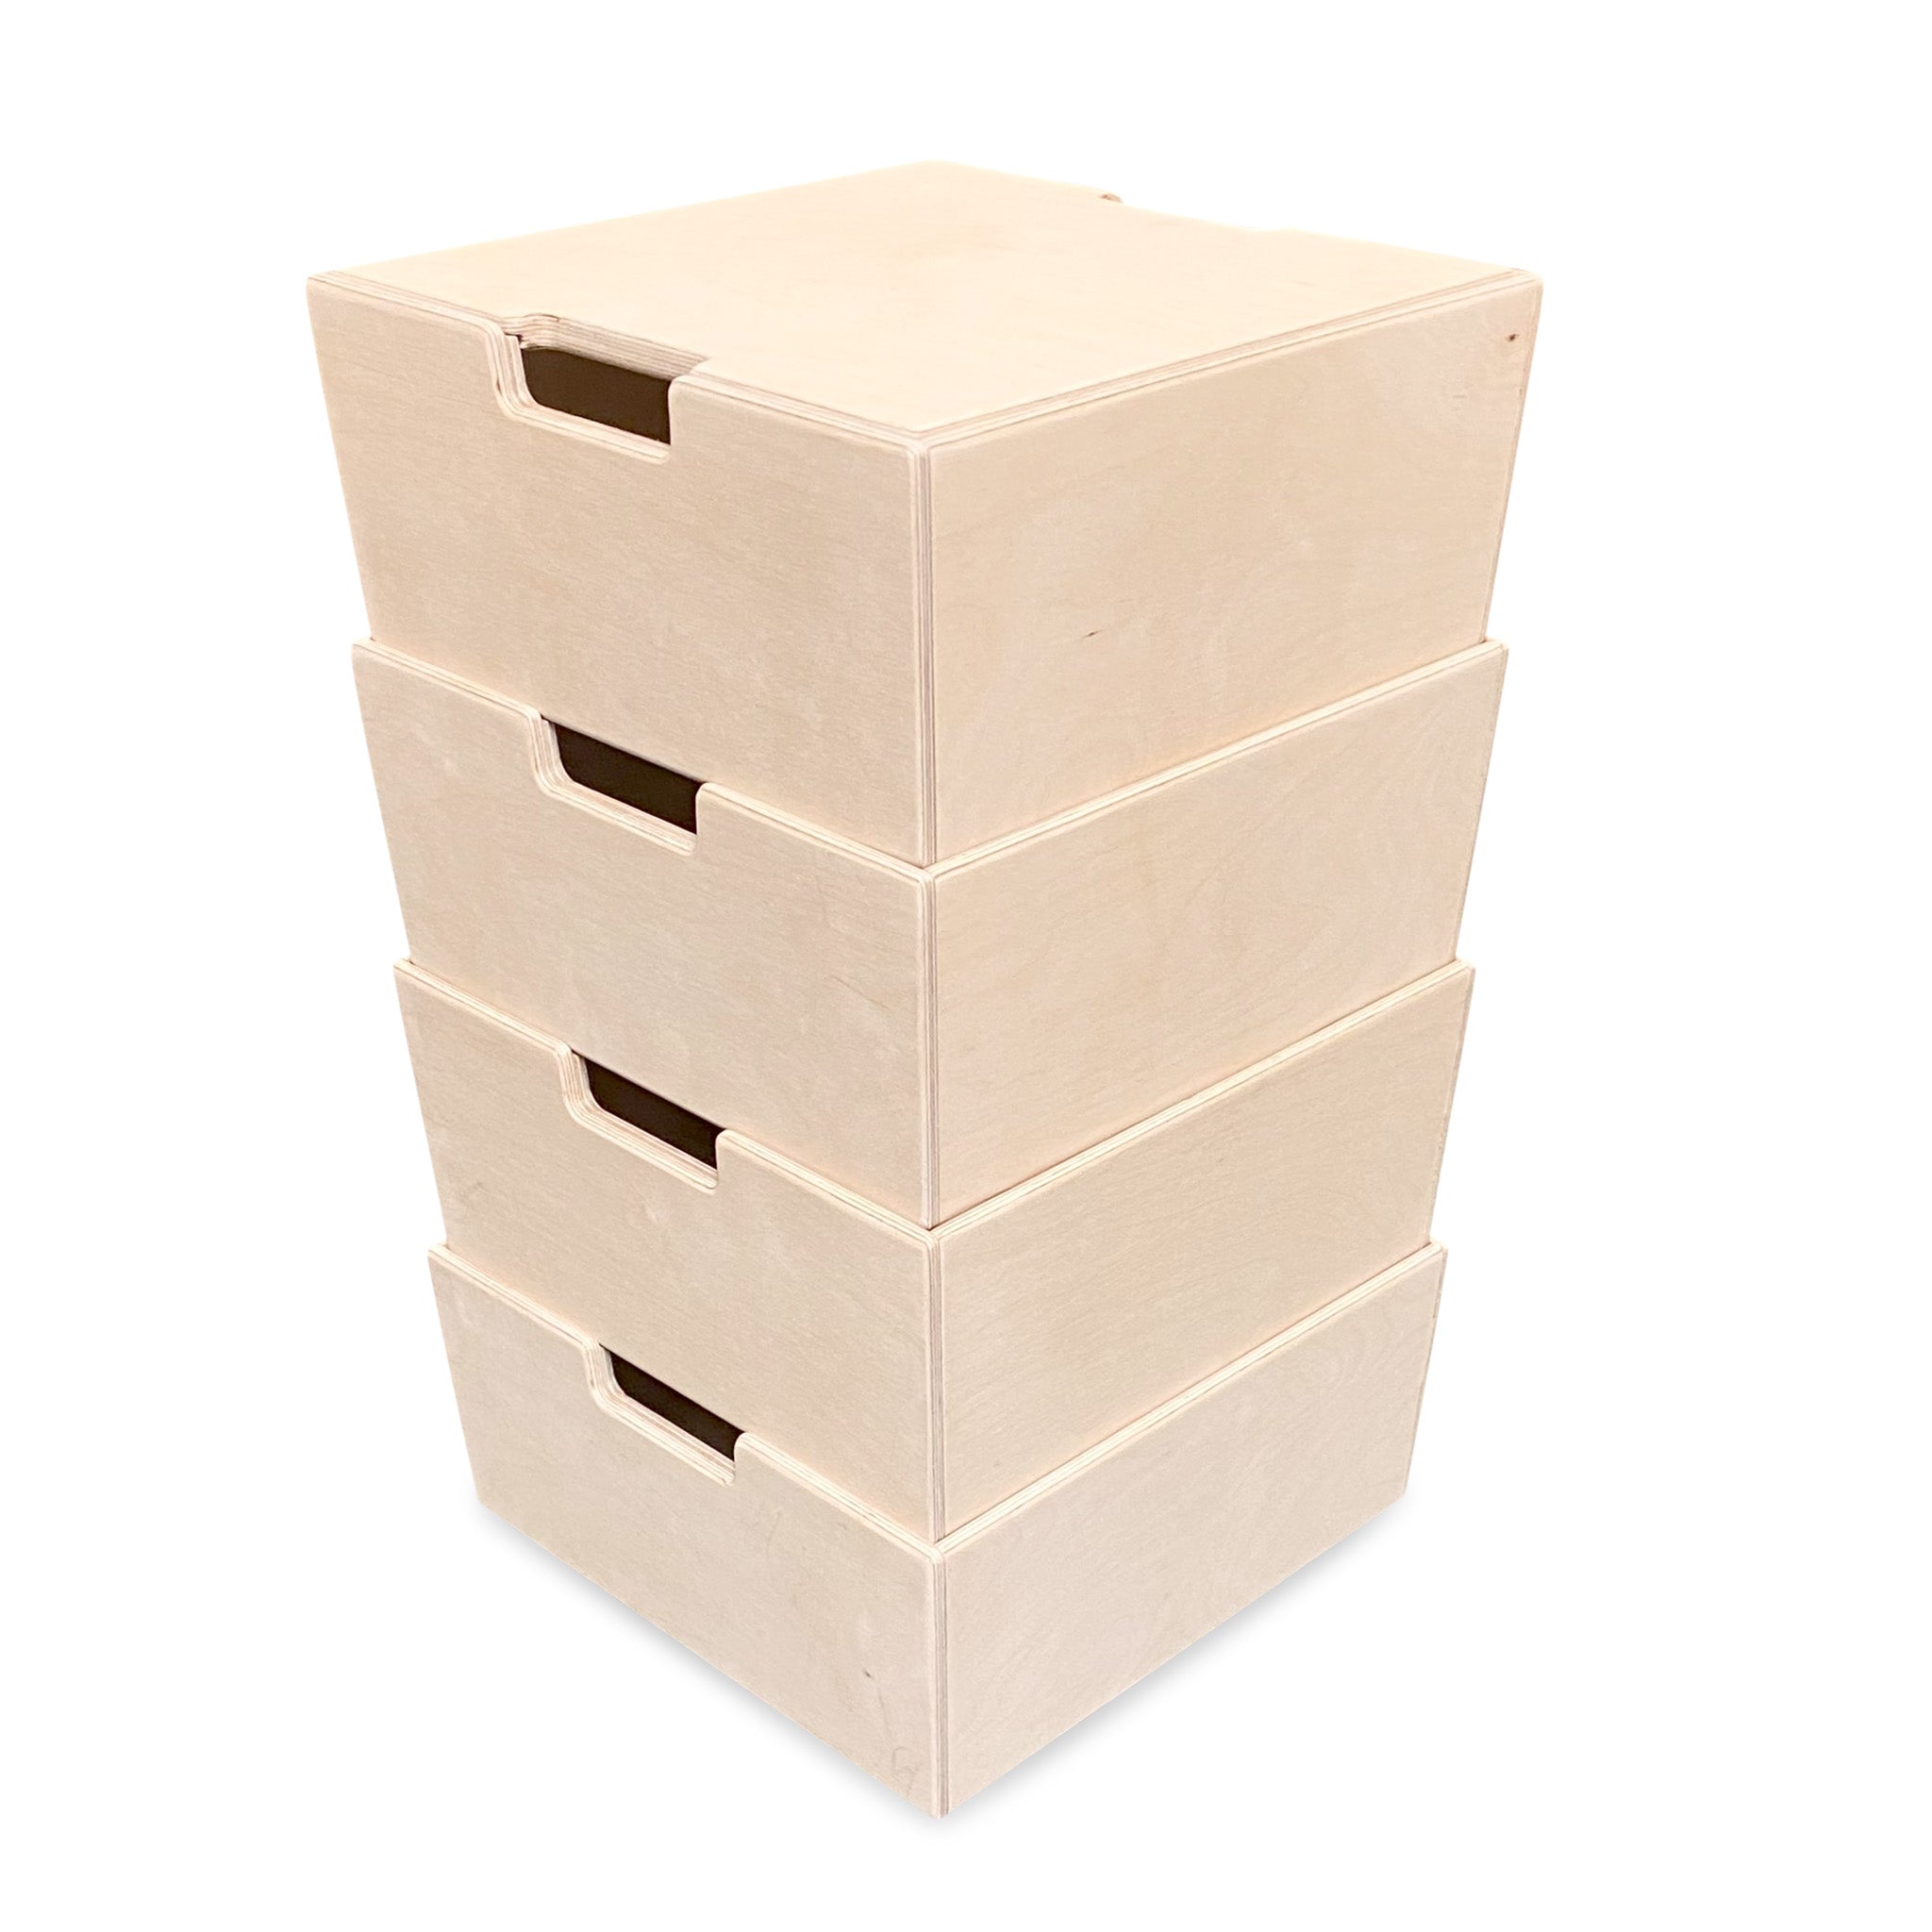 Montessori storage boxes children's room | Stackable wooden boxes as a step stool - natural